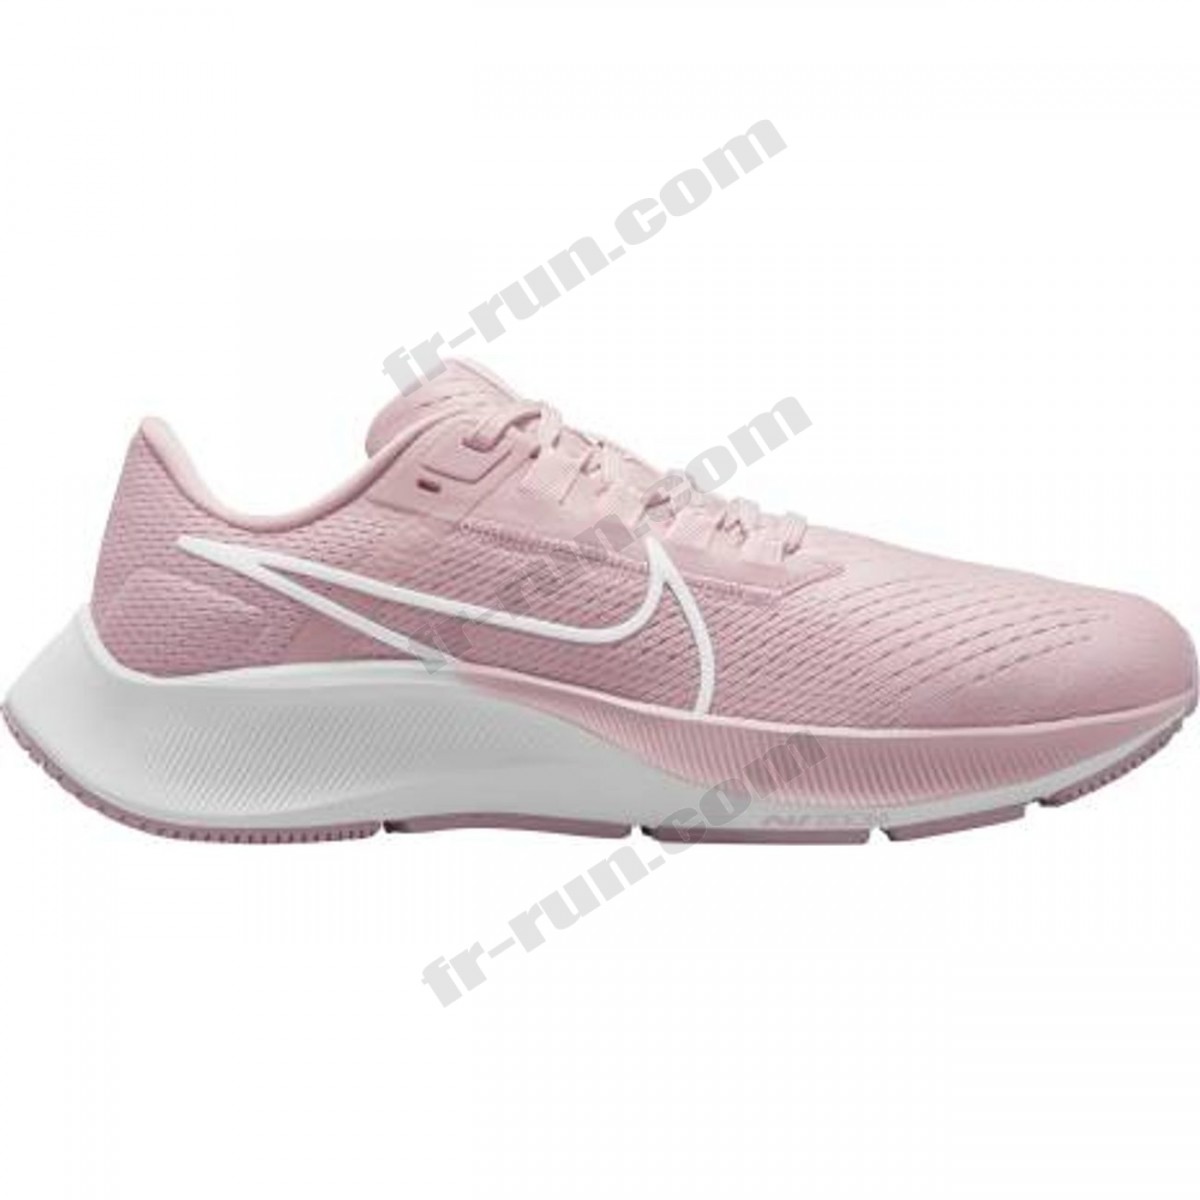 Nike/CHAUSSURES running femme NIKE WMNS NIKE AIR ZOOM PEGASUS 38 √ Nouveau style √ Soldes - -0